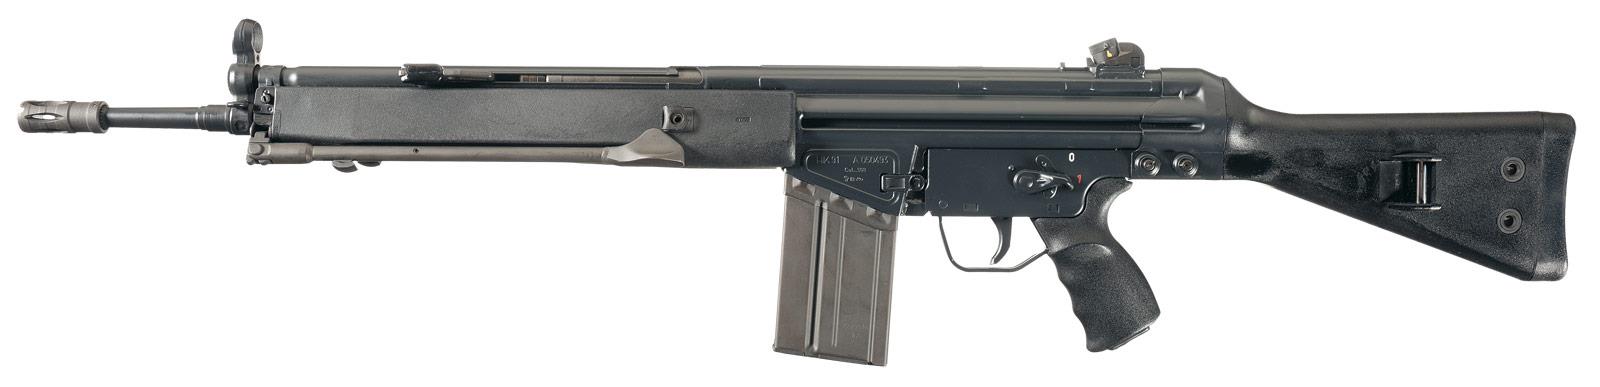 Pre-Ban Heckler & Koch HK91 Semi-Automatic Rifle with Bipod.